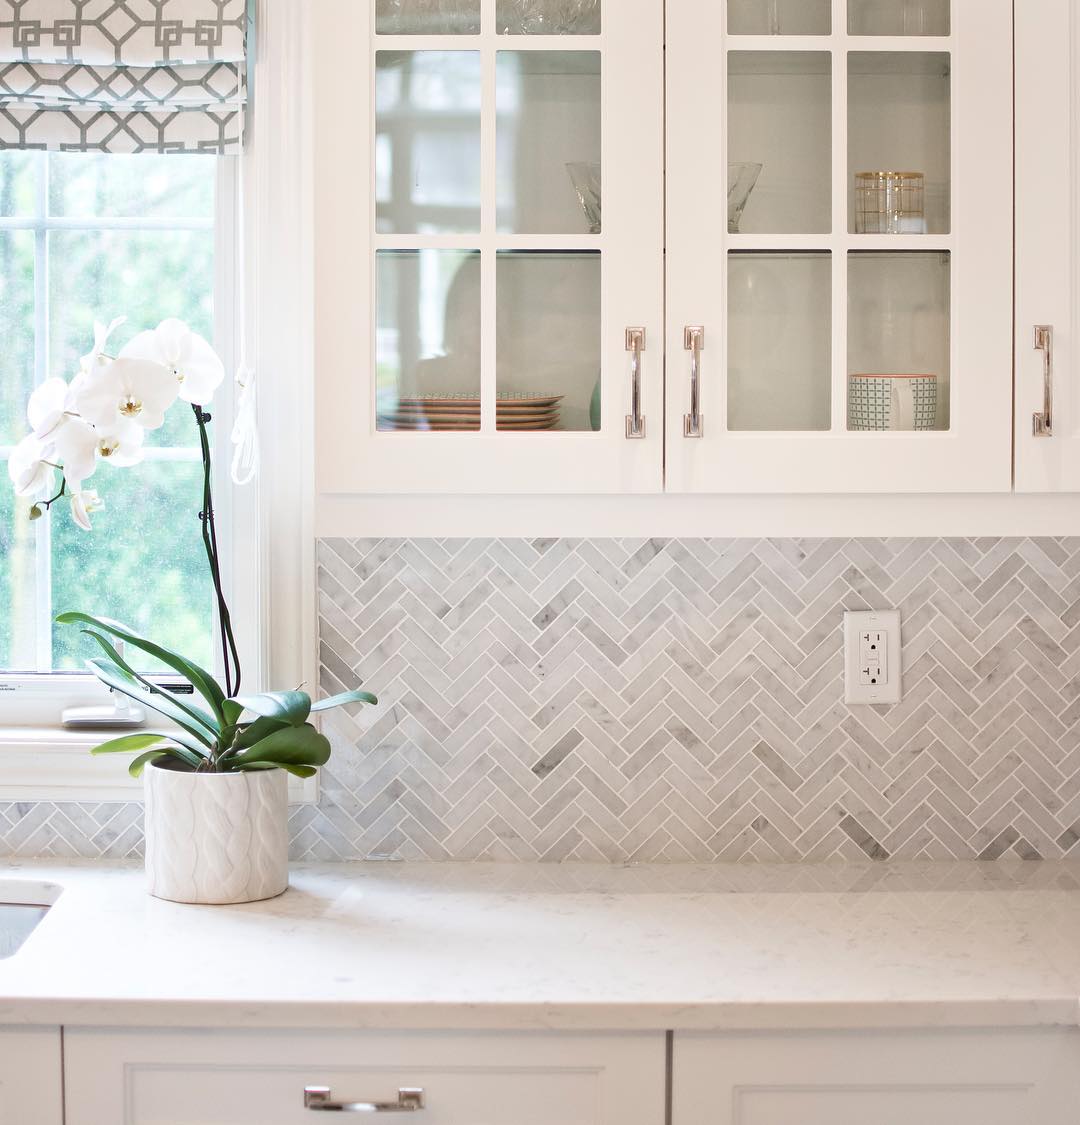 Kitchen with glass cabinets. Photo by Instagram user @erin_interiors